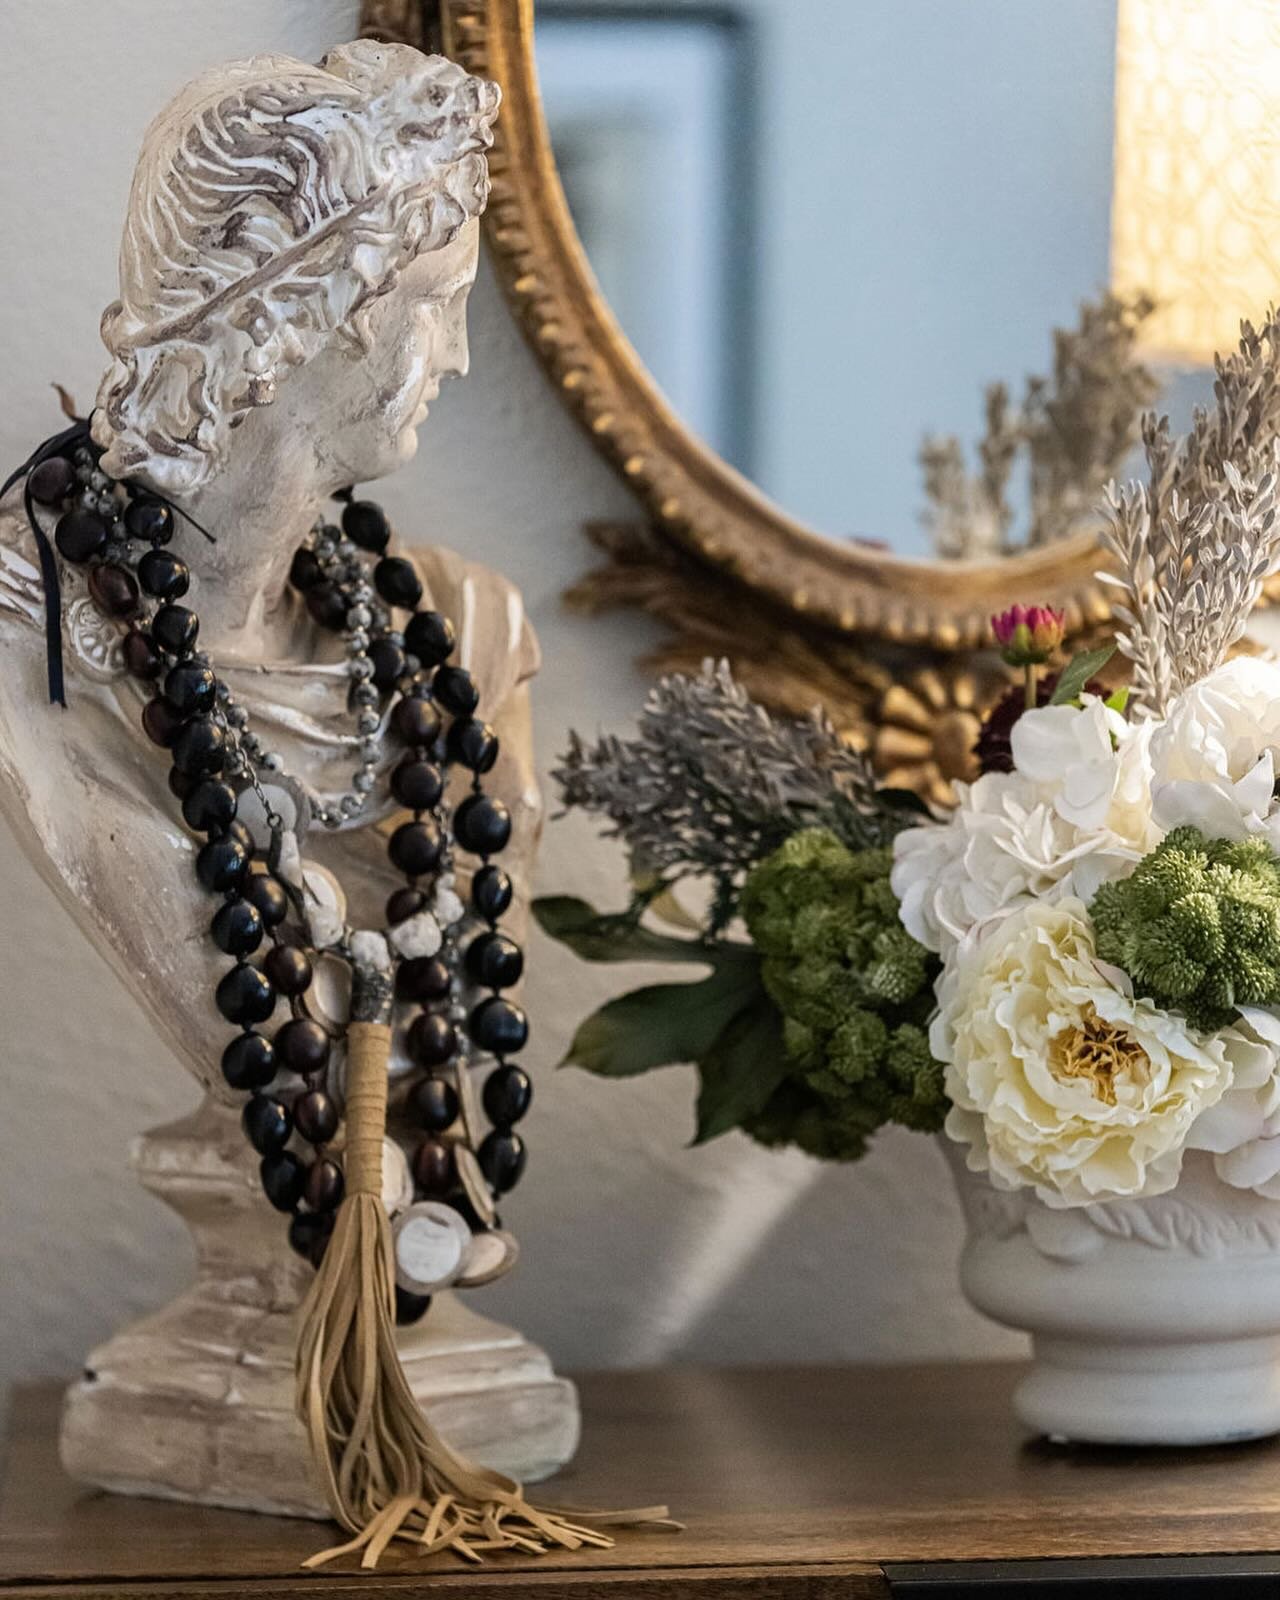 Using bust sculptures as a necklace holder is a great way to display those items you love and want to enjoy on a daily basis! #decoratingwithbusts #sculptures #decorating #interiordesign #dallasdesigner #ruthiestaalseninteriors #homedecorideas #bustd